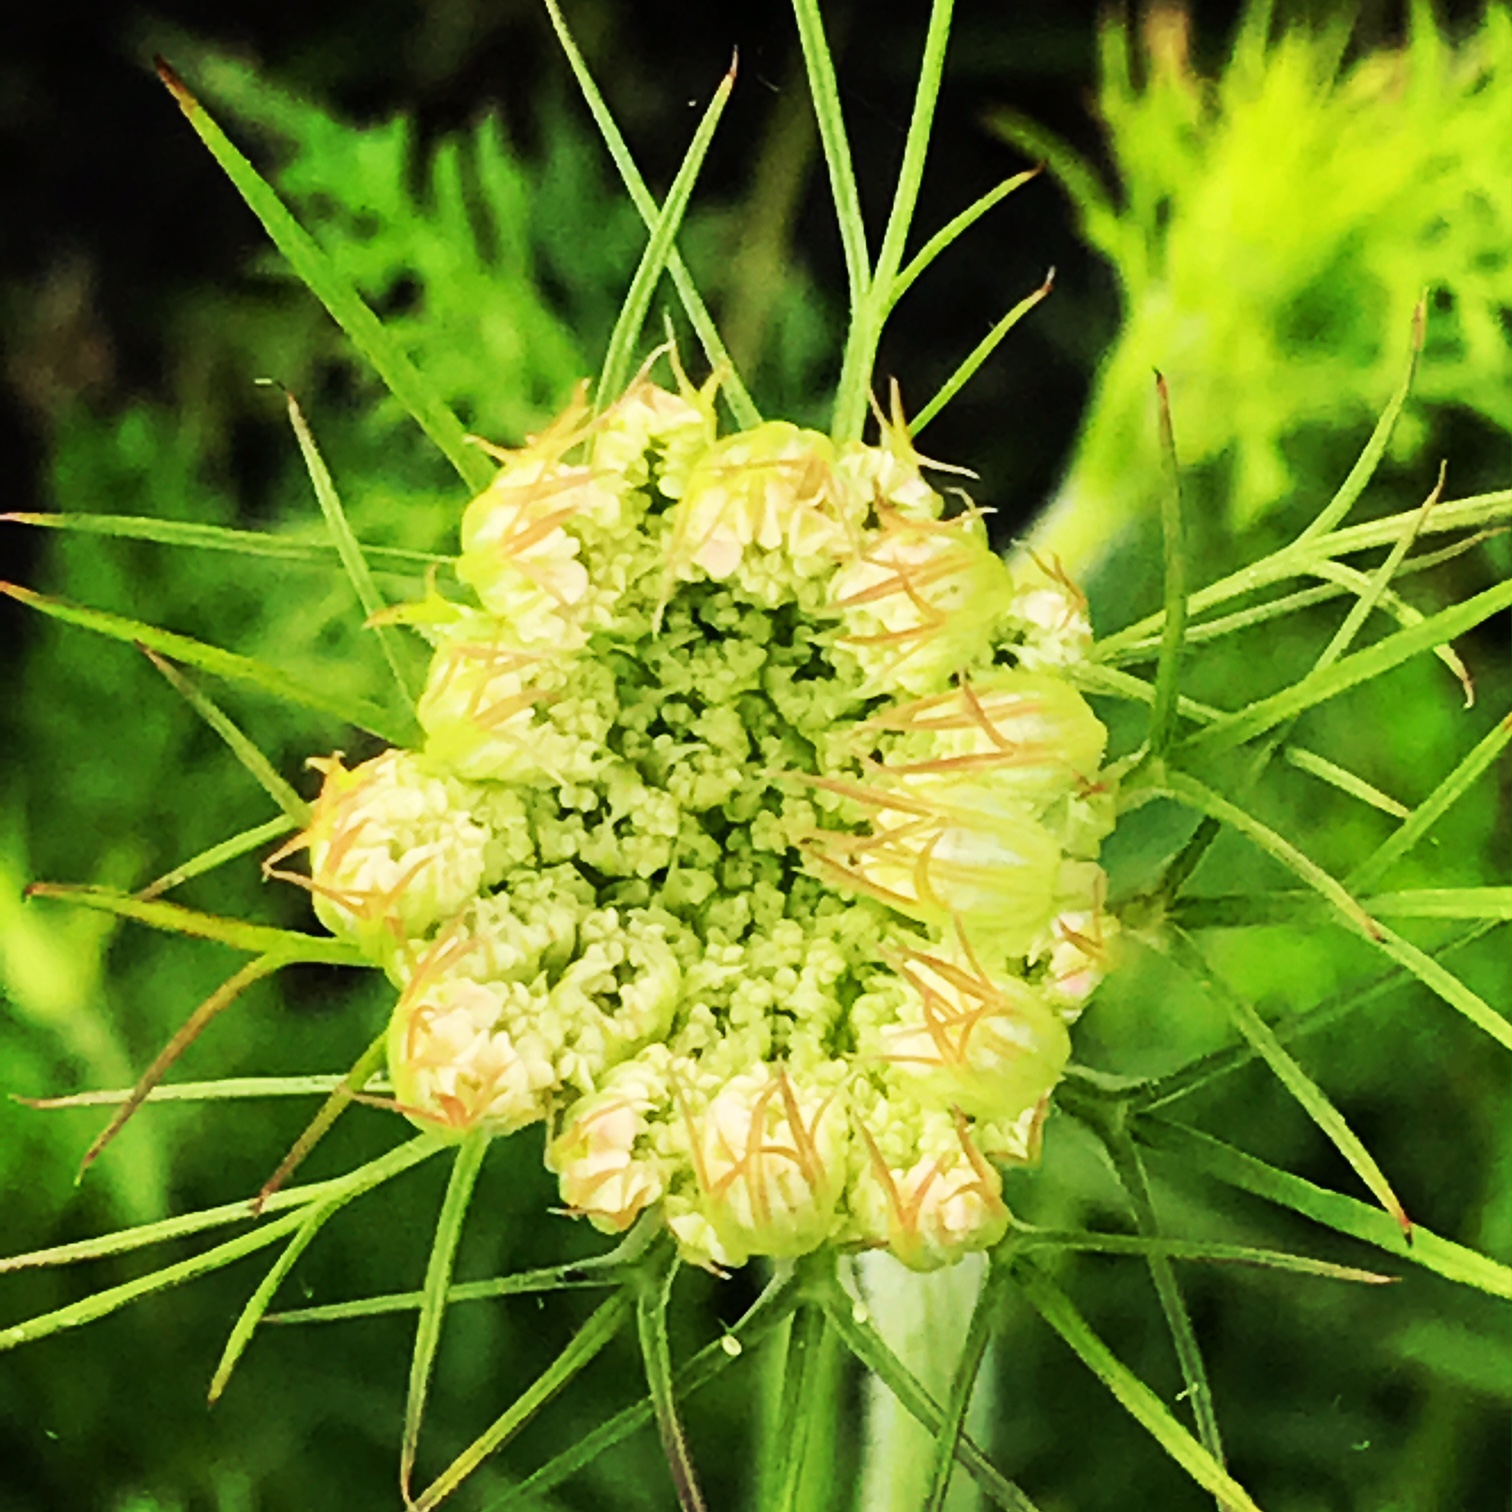 Queen Anne's Lace Opening